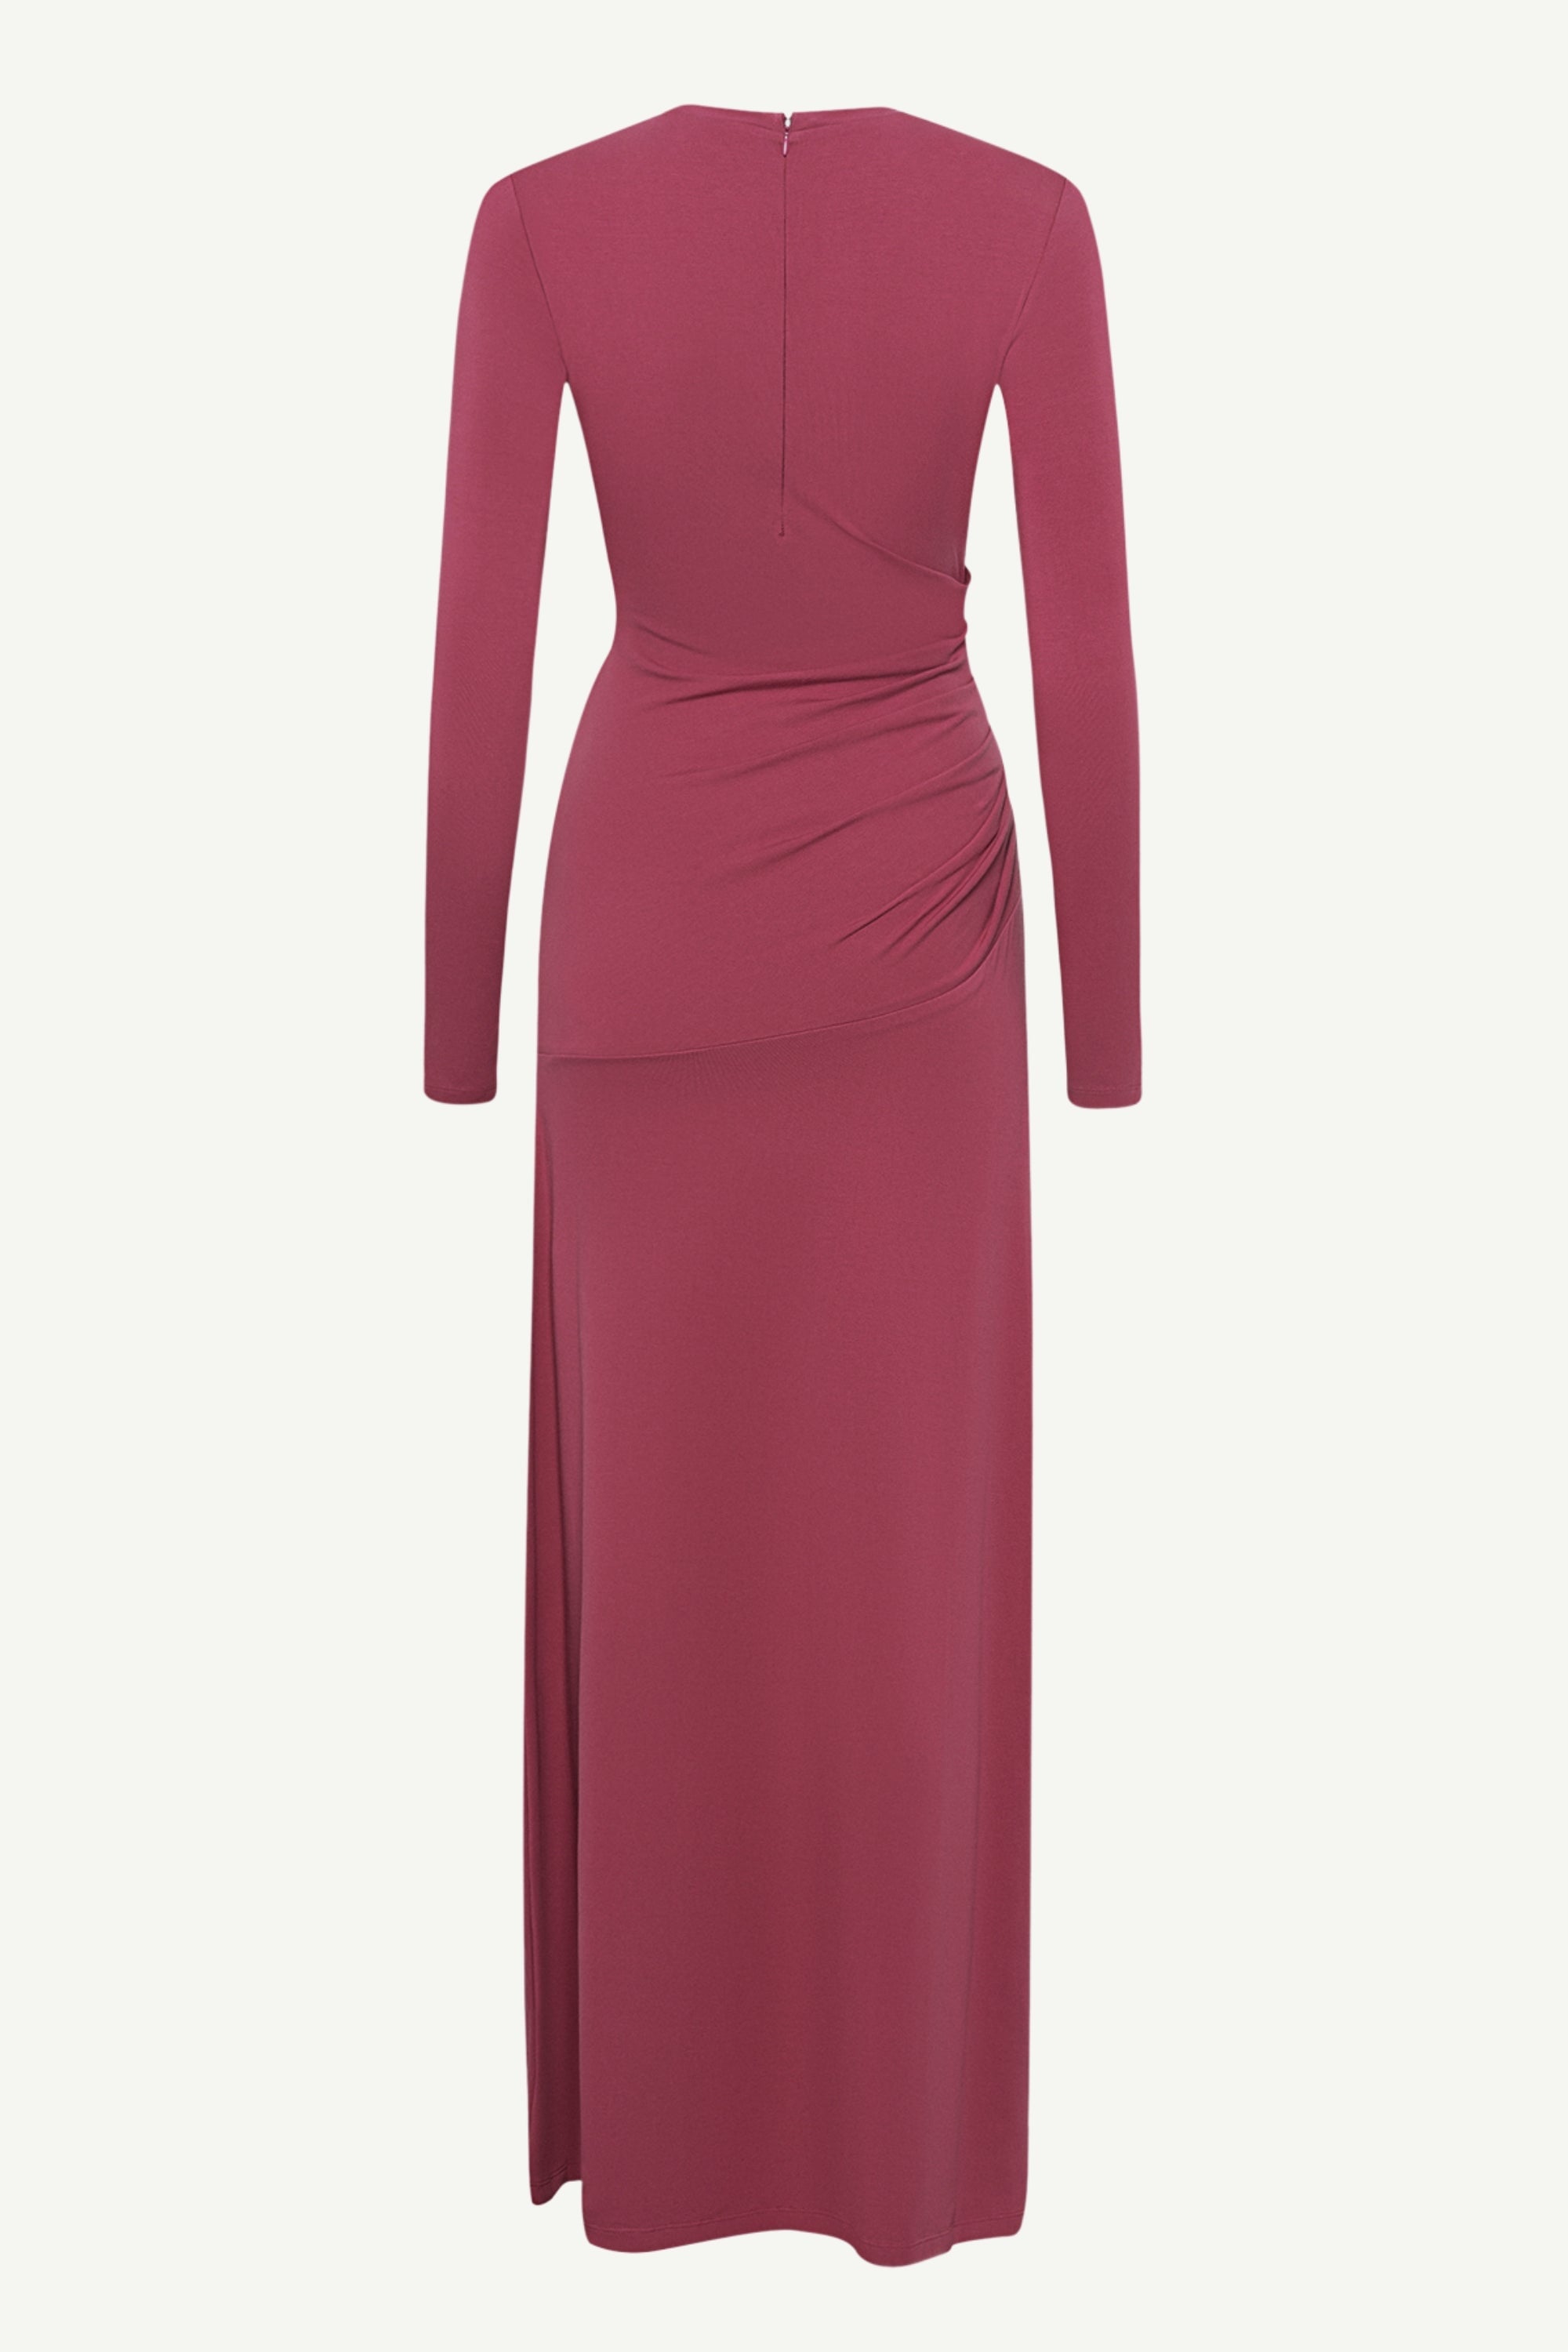 Natalie Rouched Jersey Maxi Dress - Dry Rose Clothing Veiled 